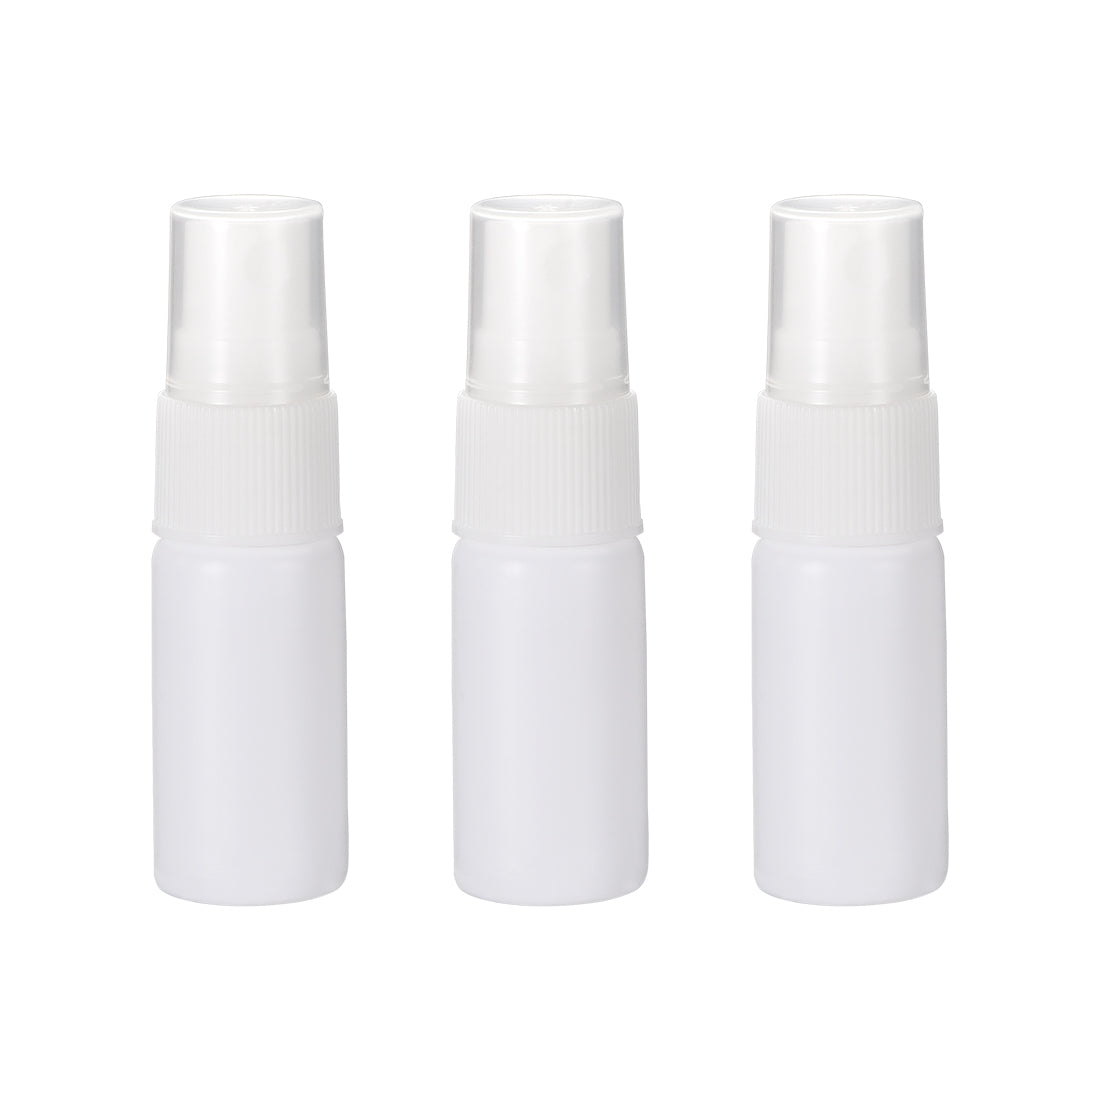 uxcell Uxcell Fine Mist Spray Bottle, 0.34oz/ 10ml Plastic Spray White Bottles w Atomizer Pump and Refillable 3pcs